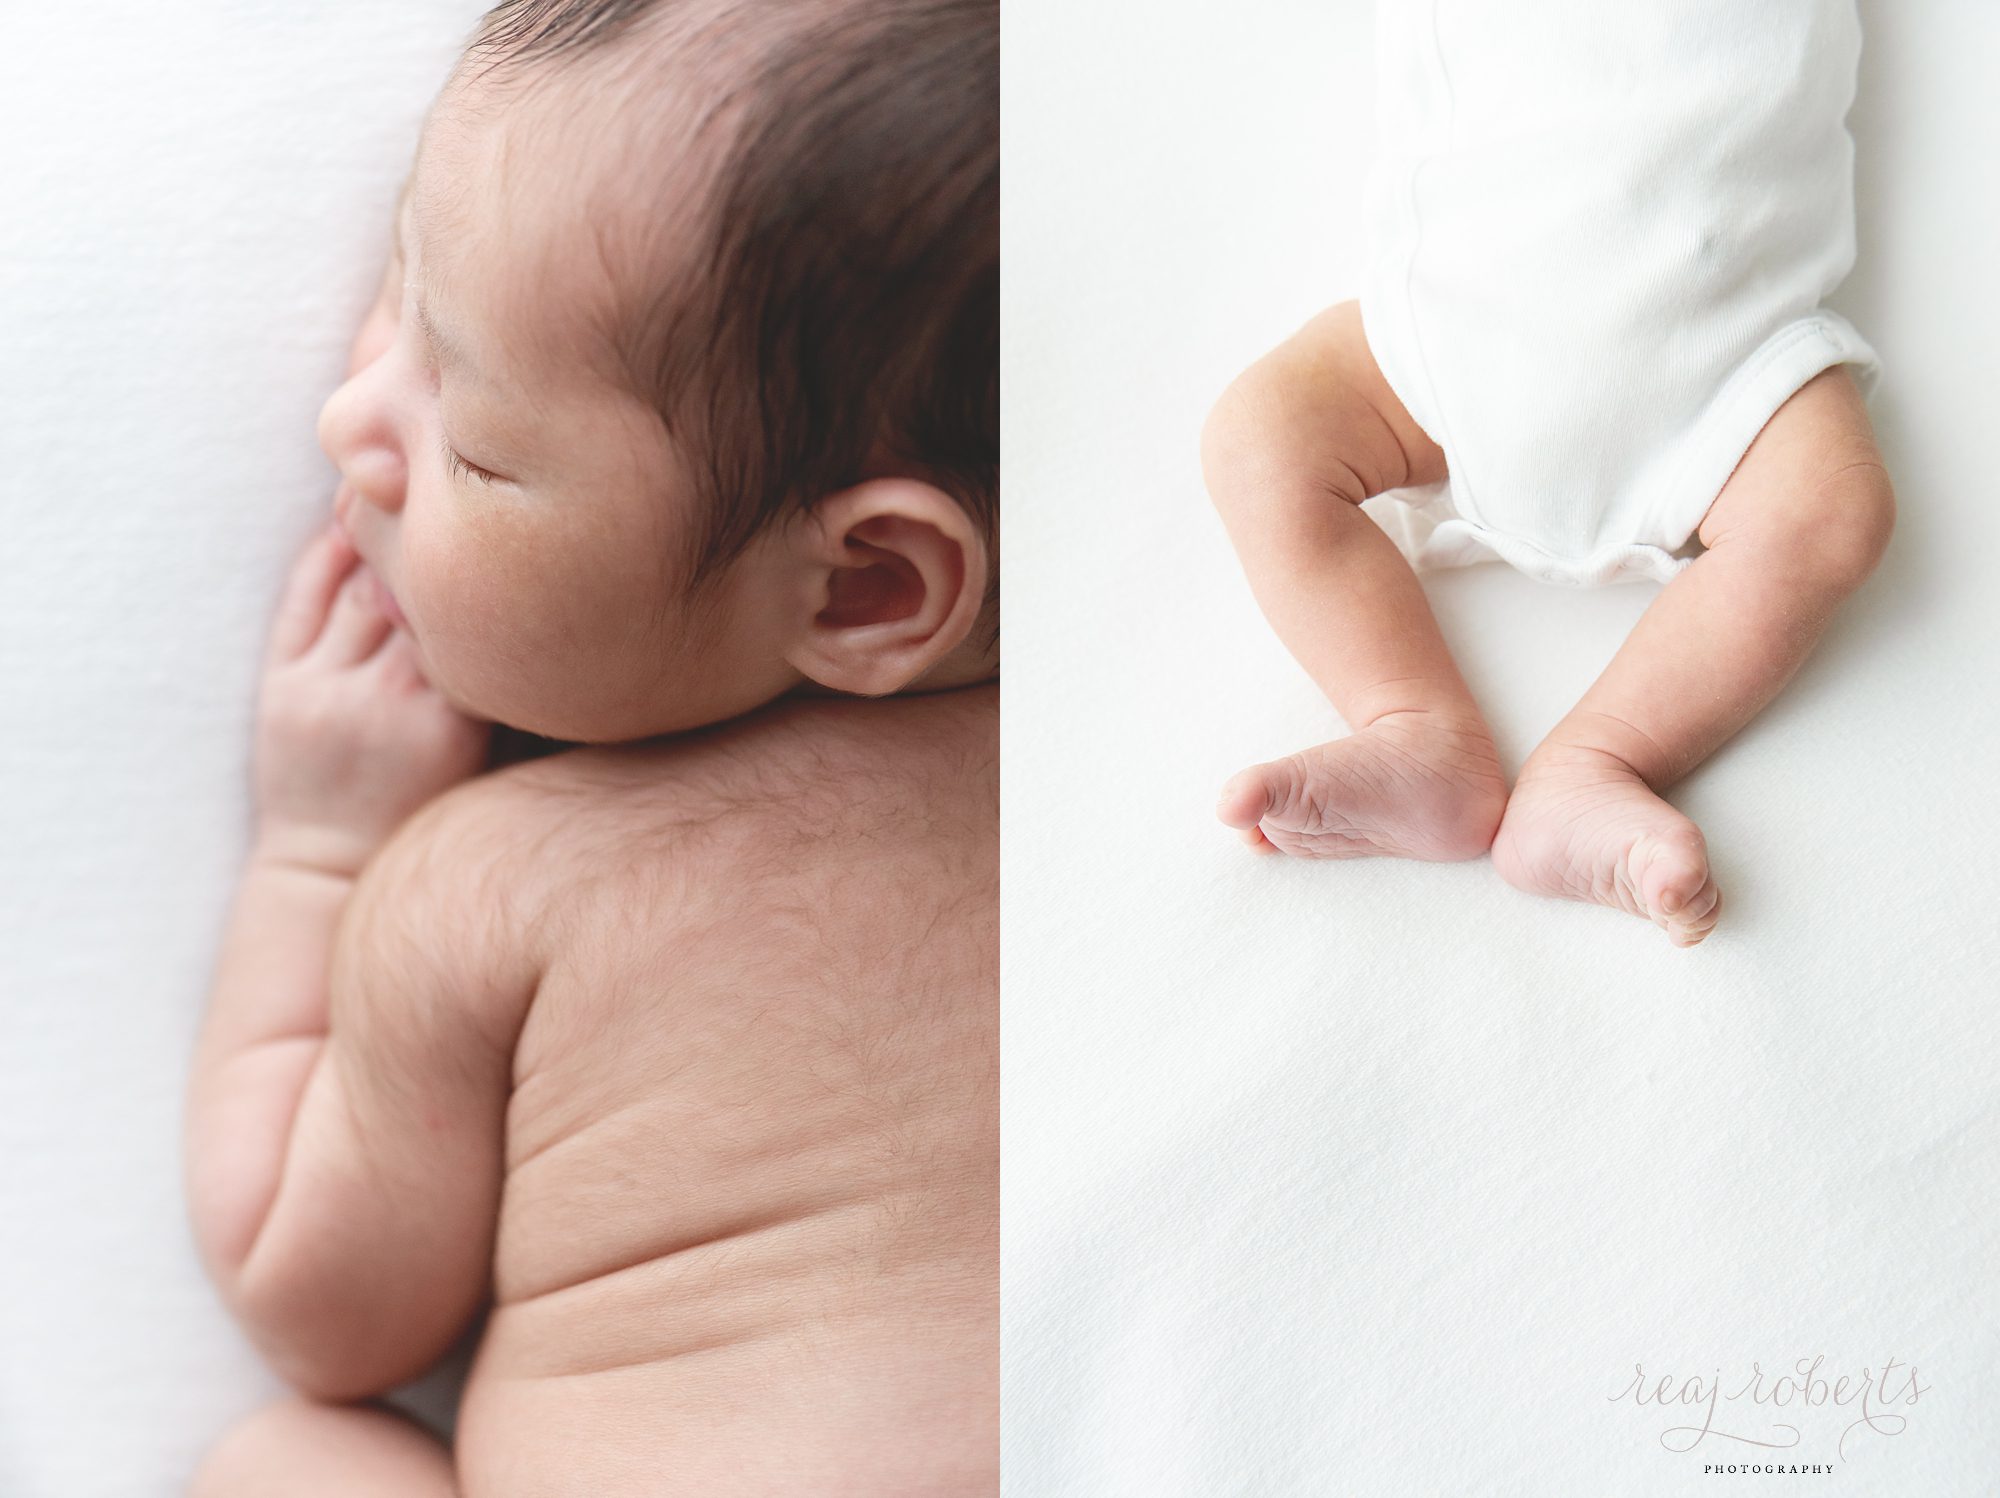 newborn baby side view and baby toes feet and legs | Reaj Roberts Photography